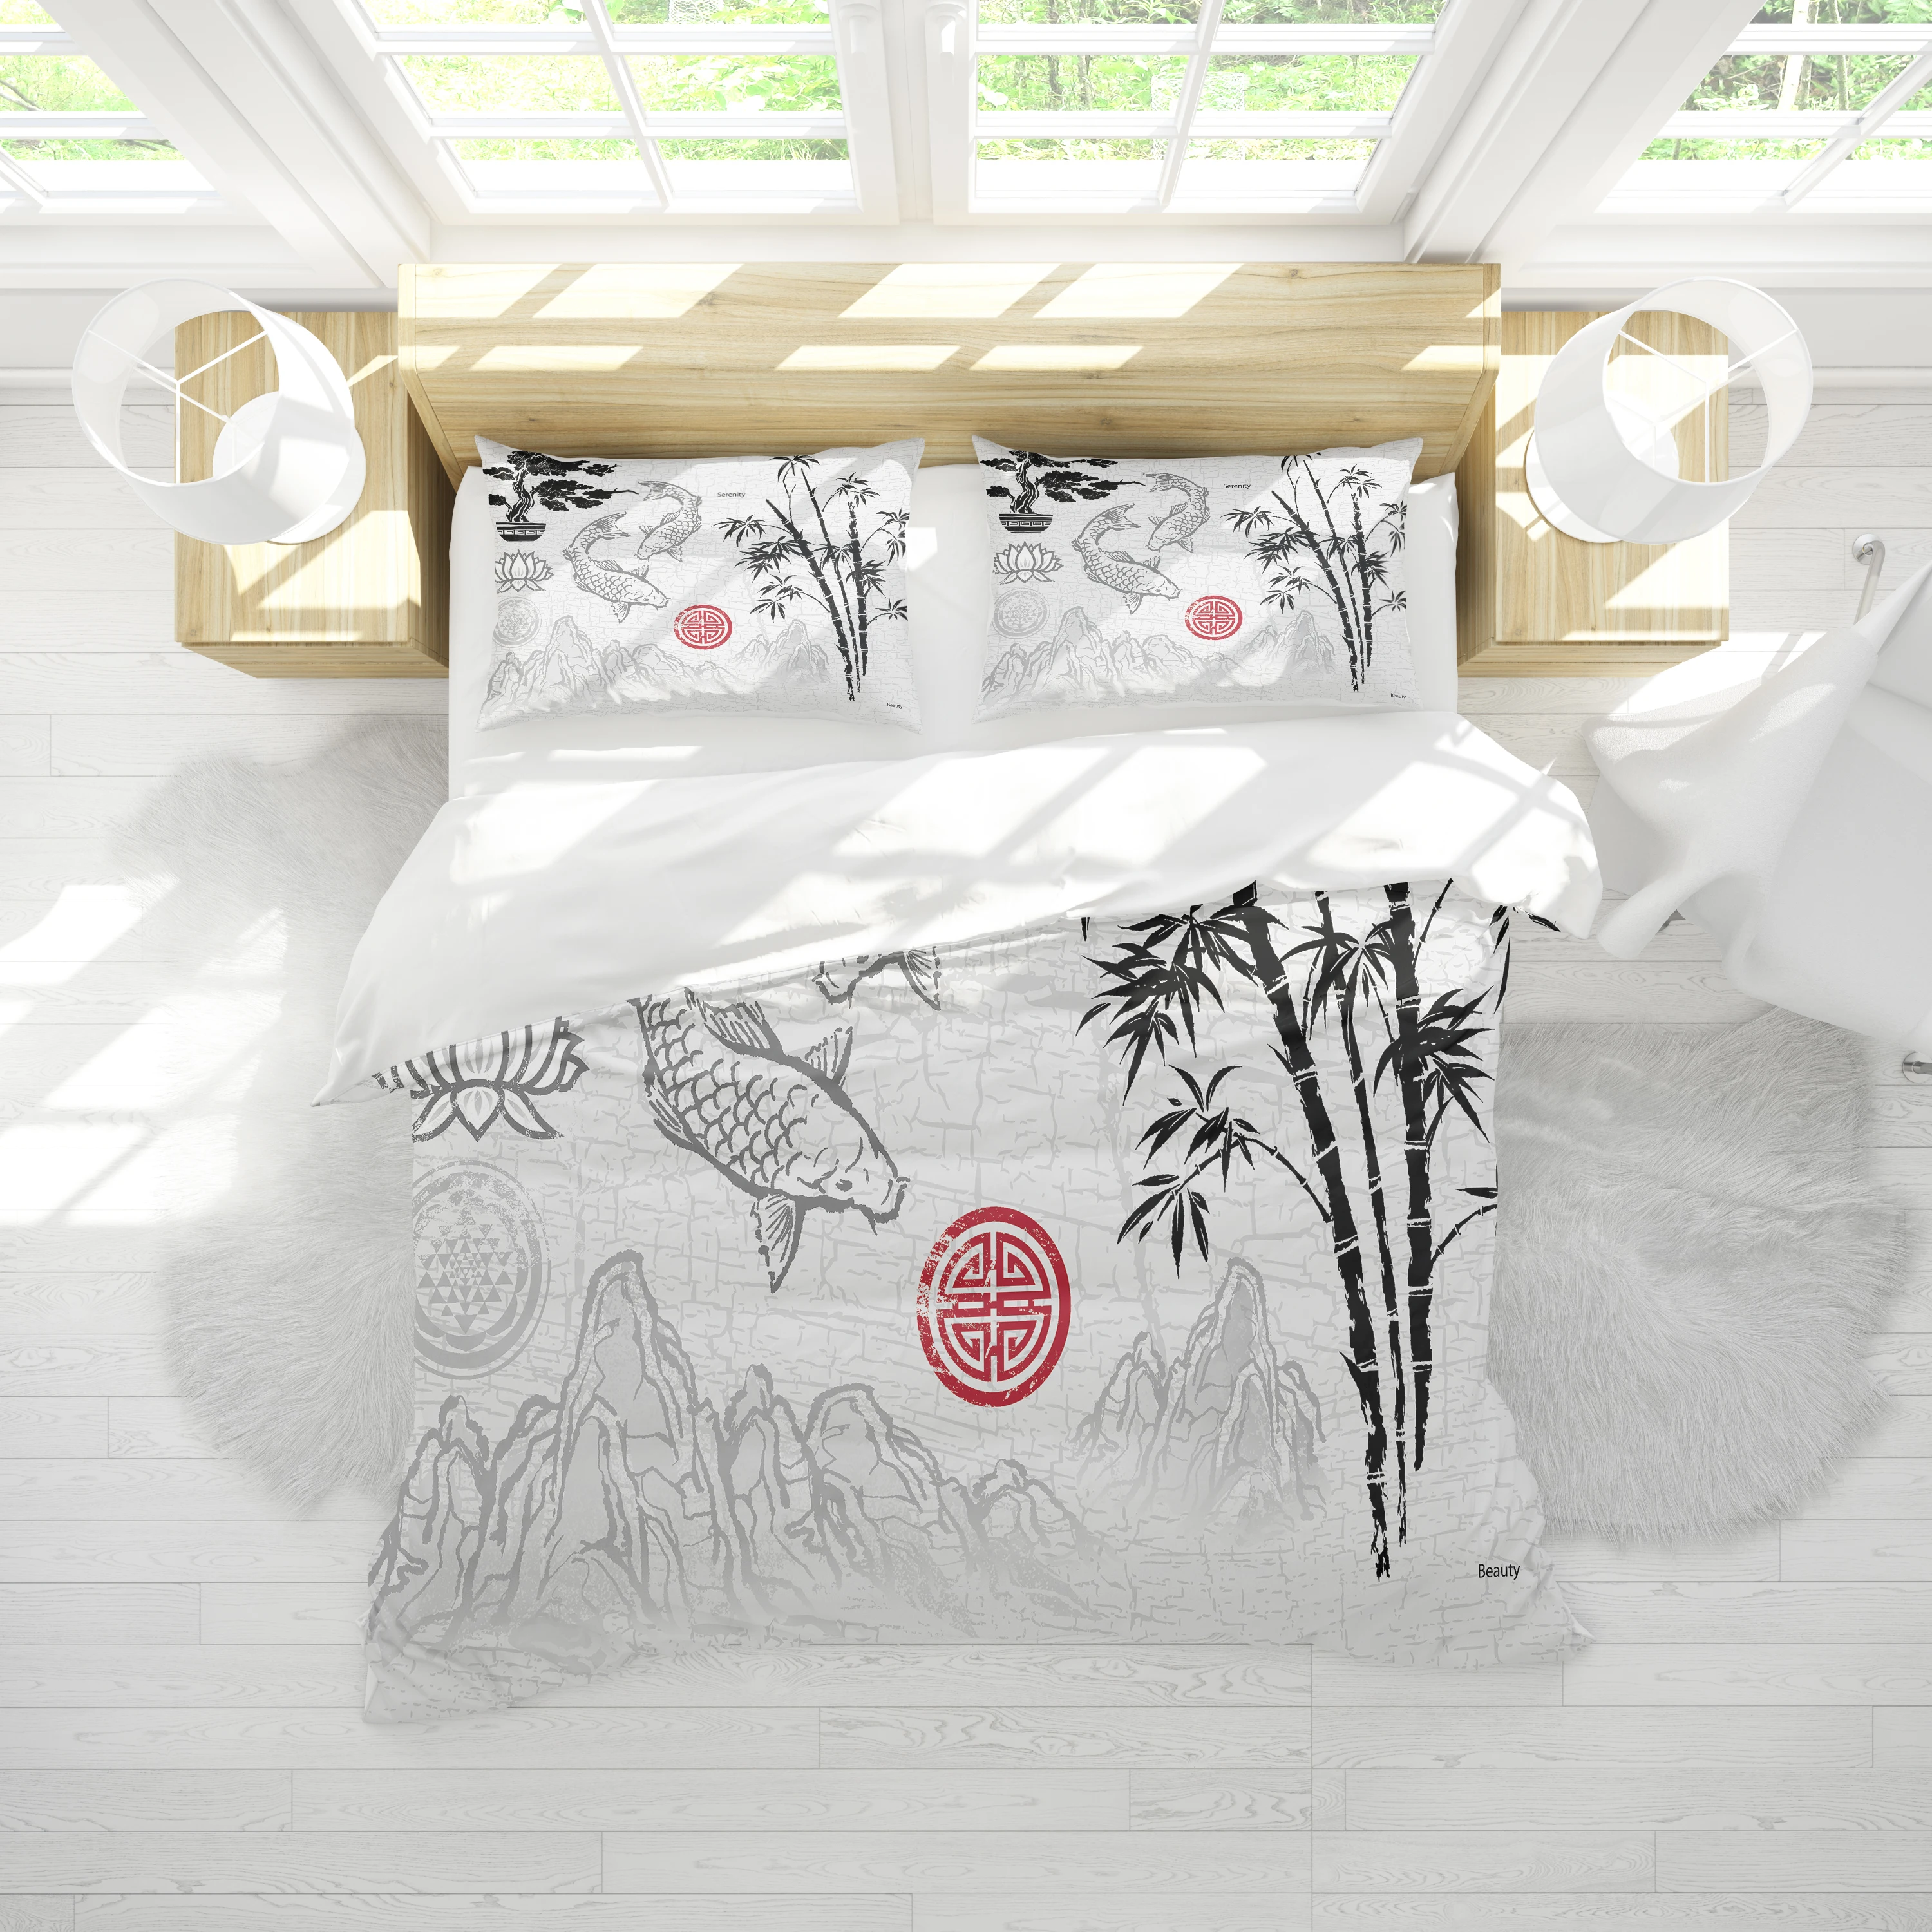 

Digital Printing Large Format Black White Ink Painting,Duvet Cover And Pillowcase 2/3 Piece Set, Bedroom Decorative Bedding Set